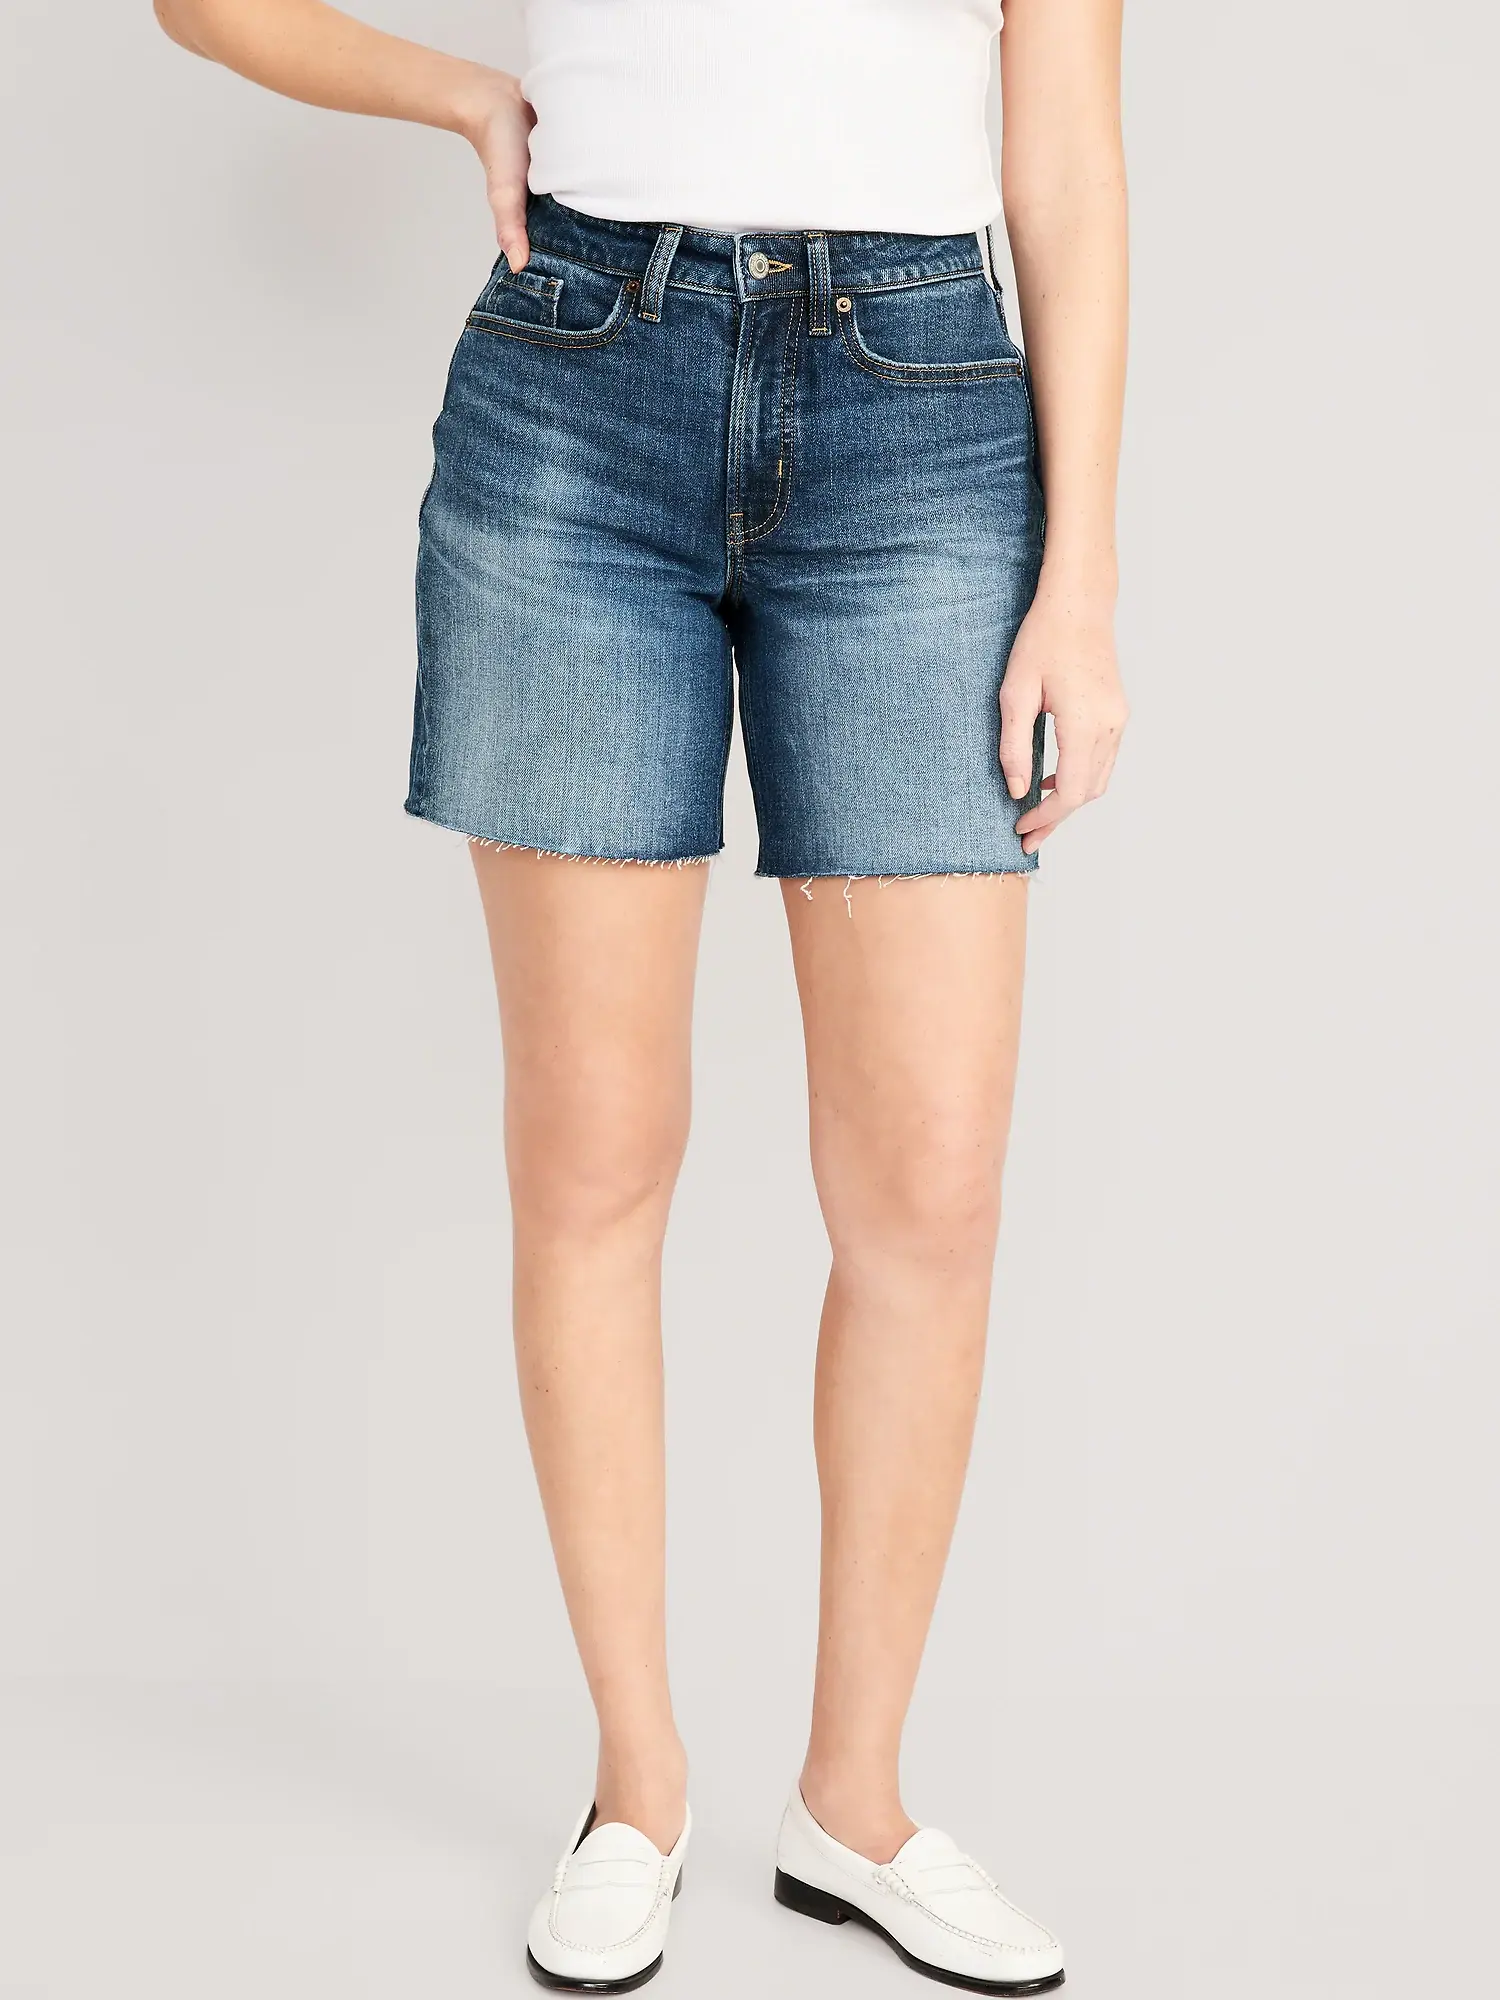 Old Navy Curvy High-Waisted OG Straight Cut-Off Jean Shorts for Women -- 5-inch inseam blue. 1